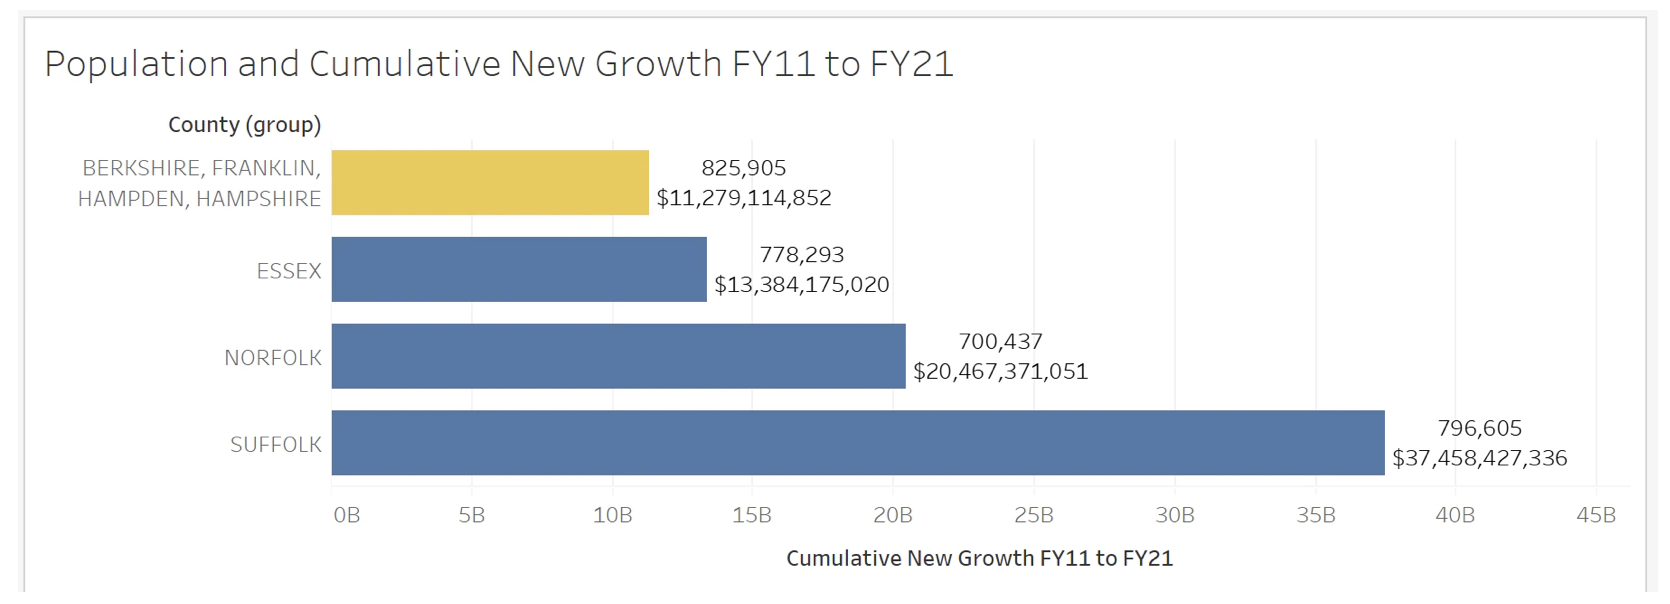 Population and Cumulative New Growth FY11 to FY21. "As shown...in Figure 8, between FY 2011 and FY 2021, the four westernmost counties’ cumulative growth was not even close to that of similarly populated counties in the eastern part of the Commonwealth. Importantly, this figure does not include the close to $1 billion in new growth that Springfield (Hampden County) could add from its casino, if it did not have a payment in lieu of taxes (PILOT) agreement in place, thus removing that property from the tax rolls. Even with that billion dollars included, the western counties would still remain $1.1 billion below Essex County in cumulative new growth." Report: Public Infrastructure in Western Massachusetts: A Critical Need for Regional Investment and Revitalization. https://www.mass.gov/report/public-infrastructure-in-western-massachusetts-a-critical-need-for-regional-investment-and-revitalization